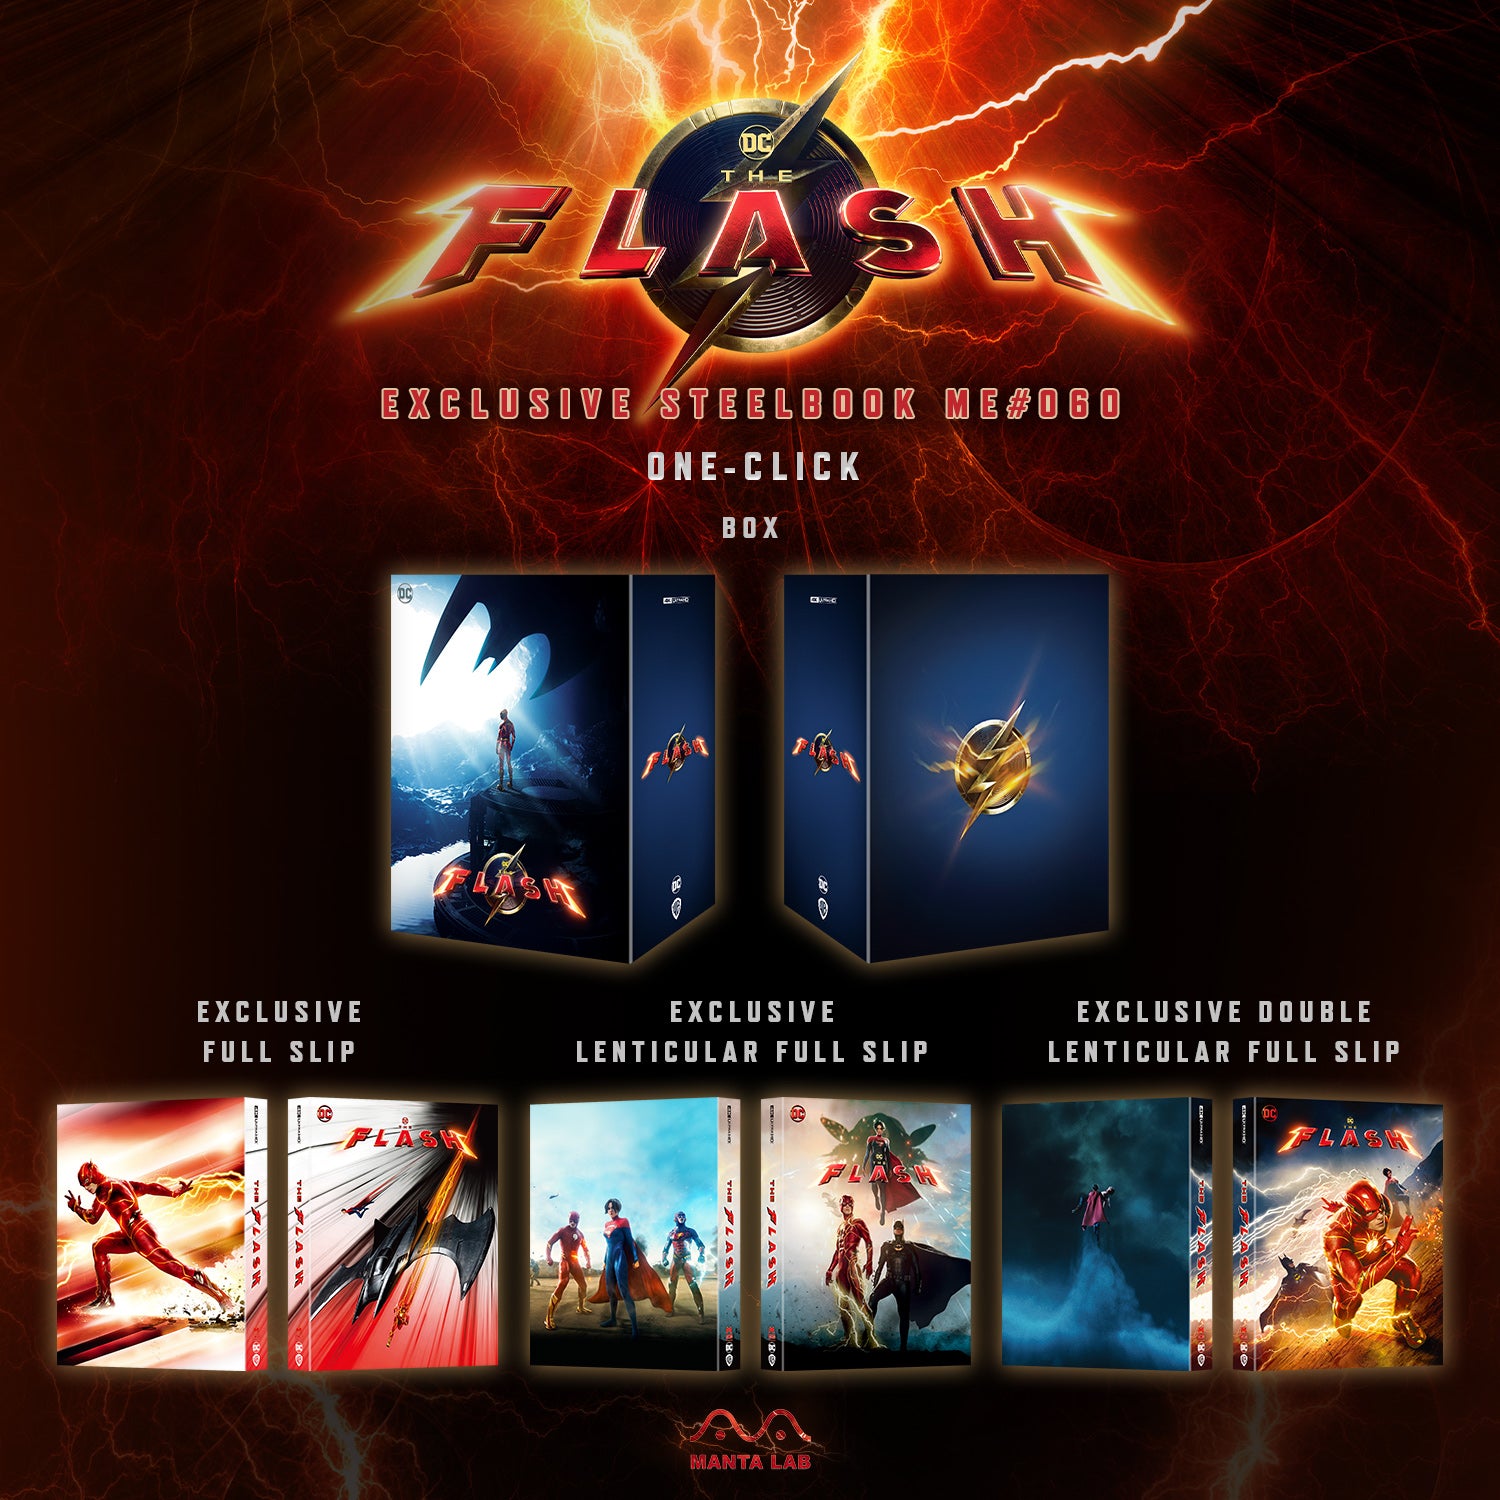 The Best Buy-Exclusive Steelbook Edition Of The Flash Is Up For Preorder -  GameSpot